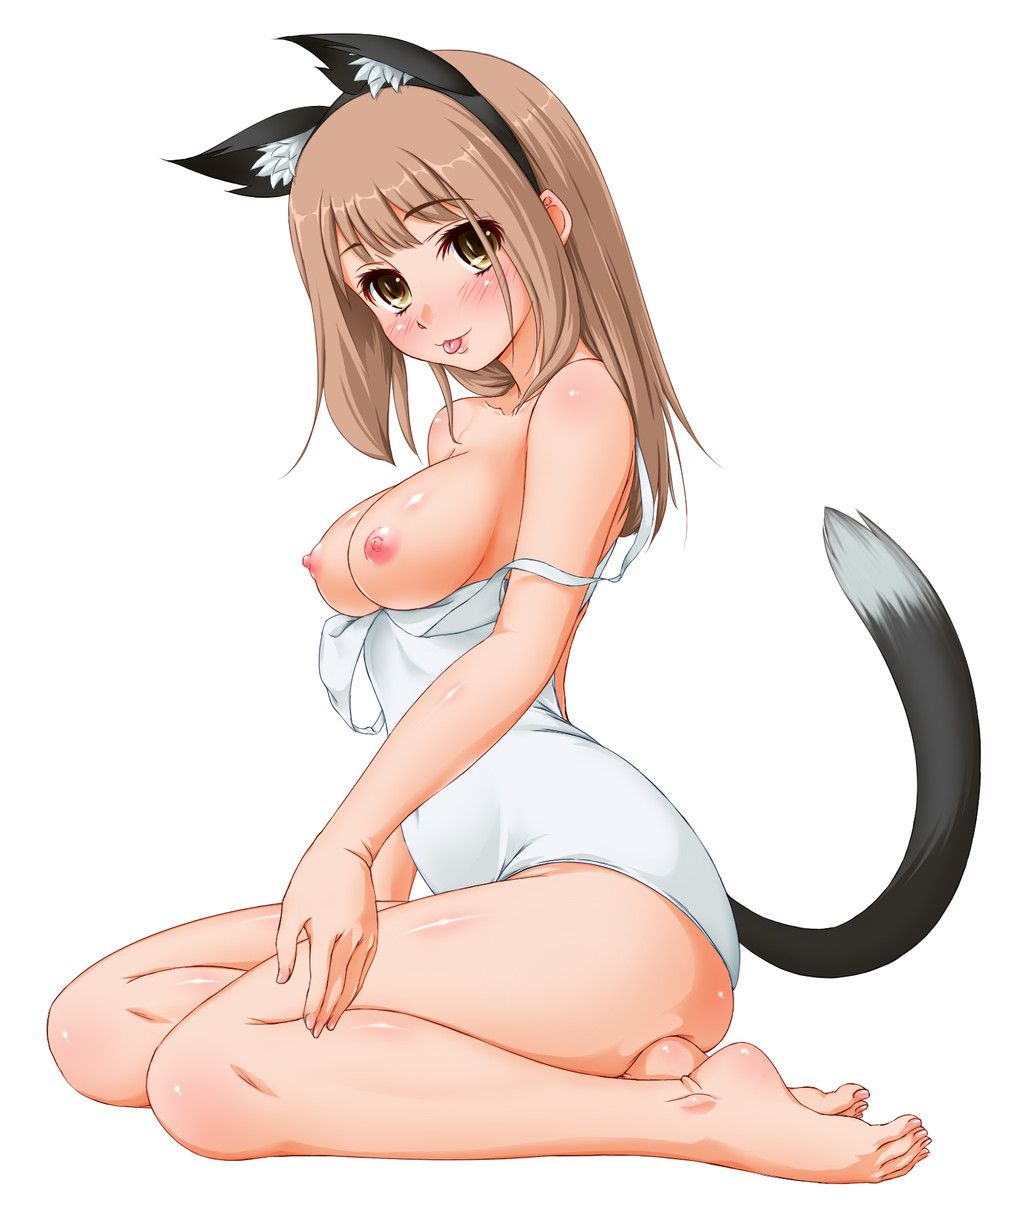 Let's be happy to see the erotic images of animal ears and beast daughter! 16